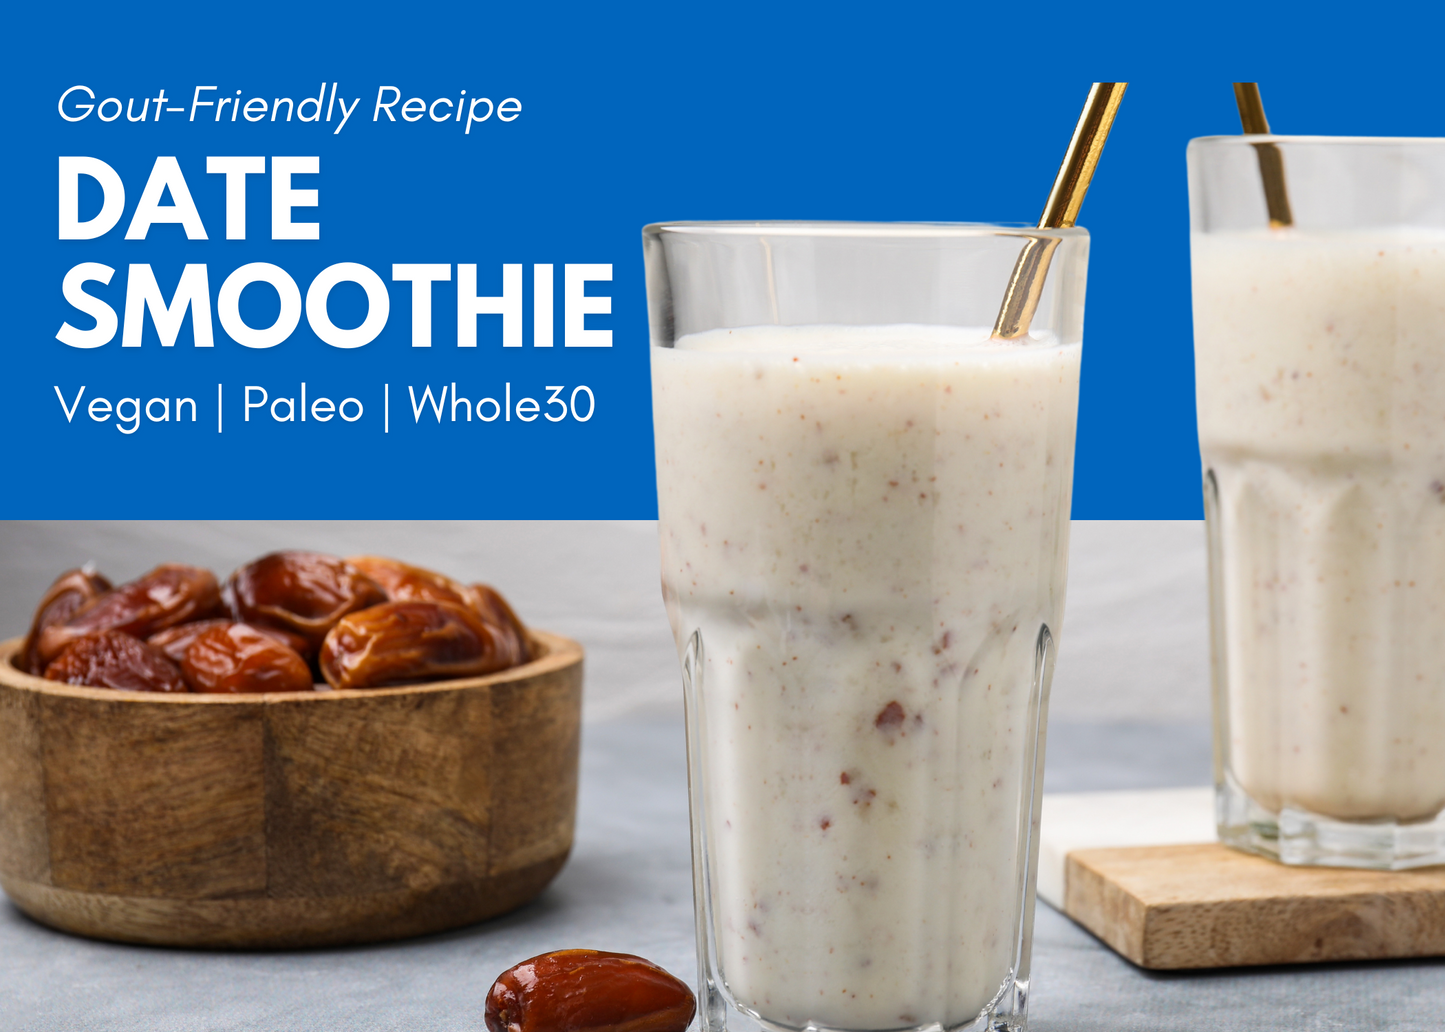 Gout-Friendly Date Smoothie